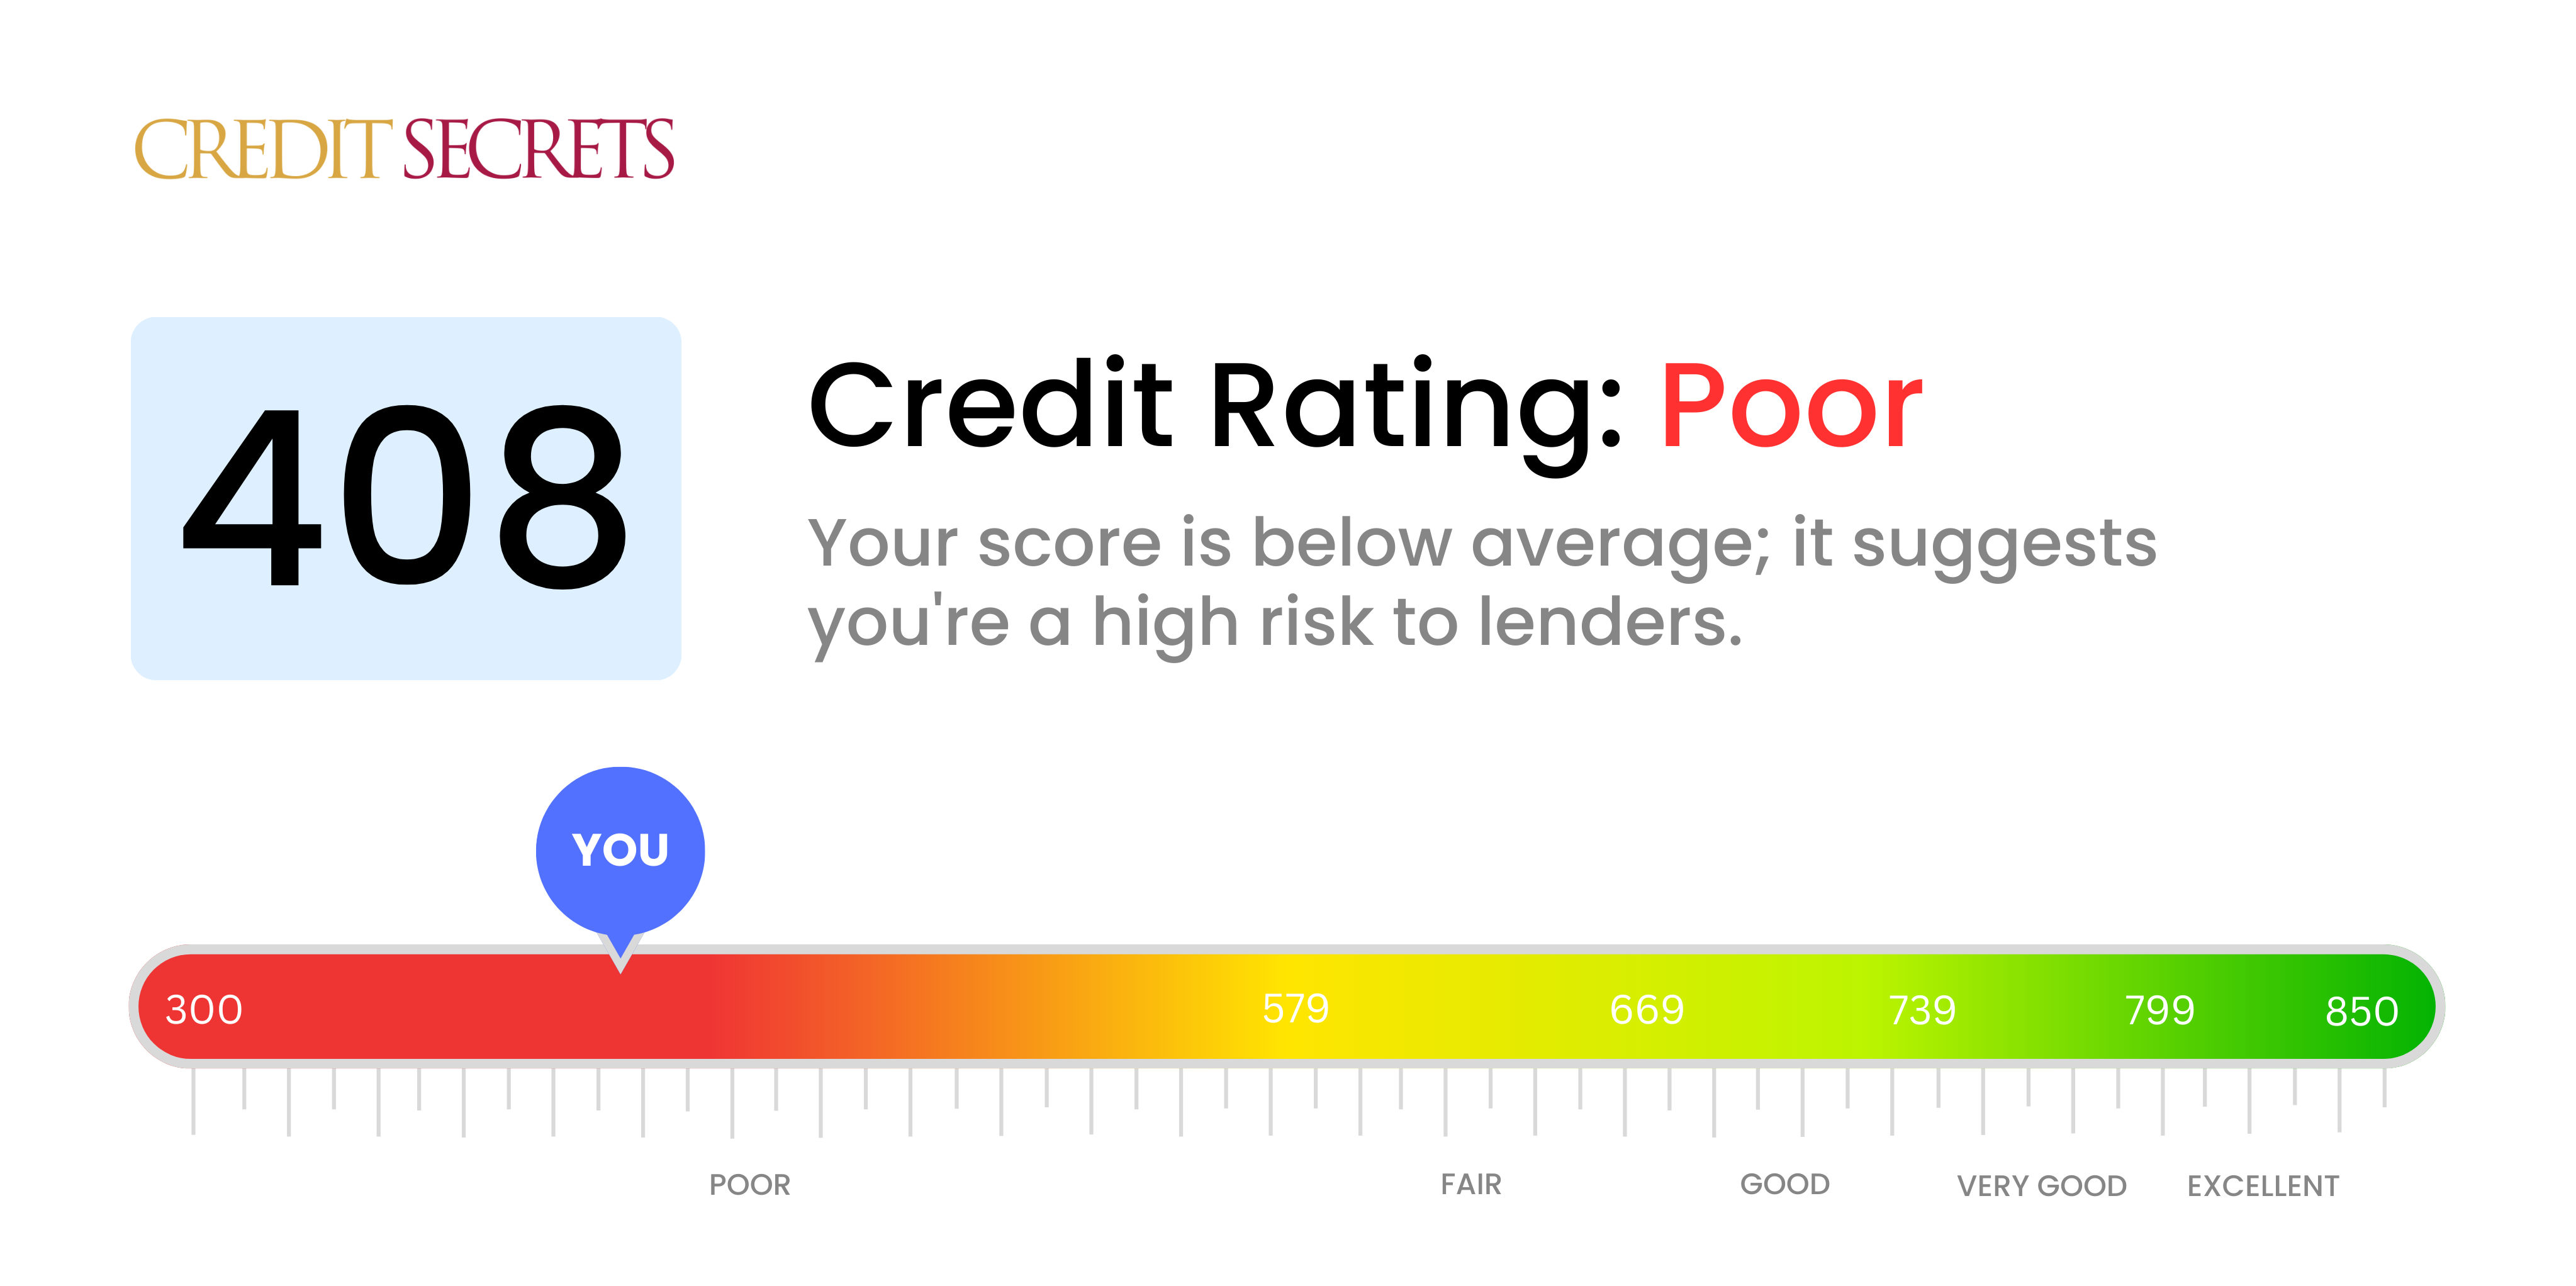 Is 408 a good credit score?